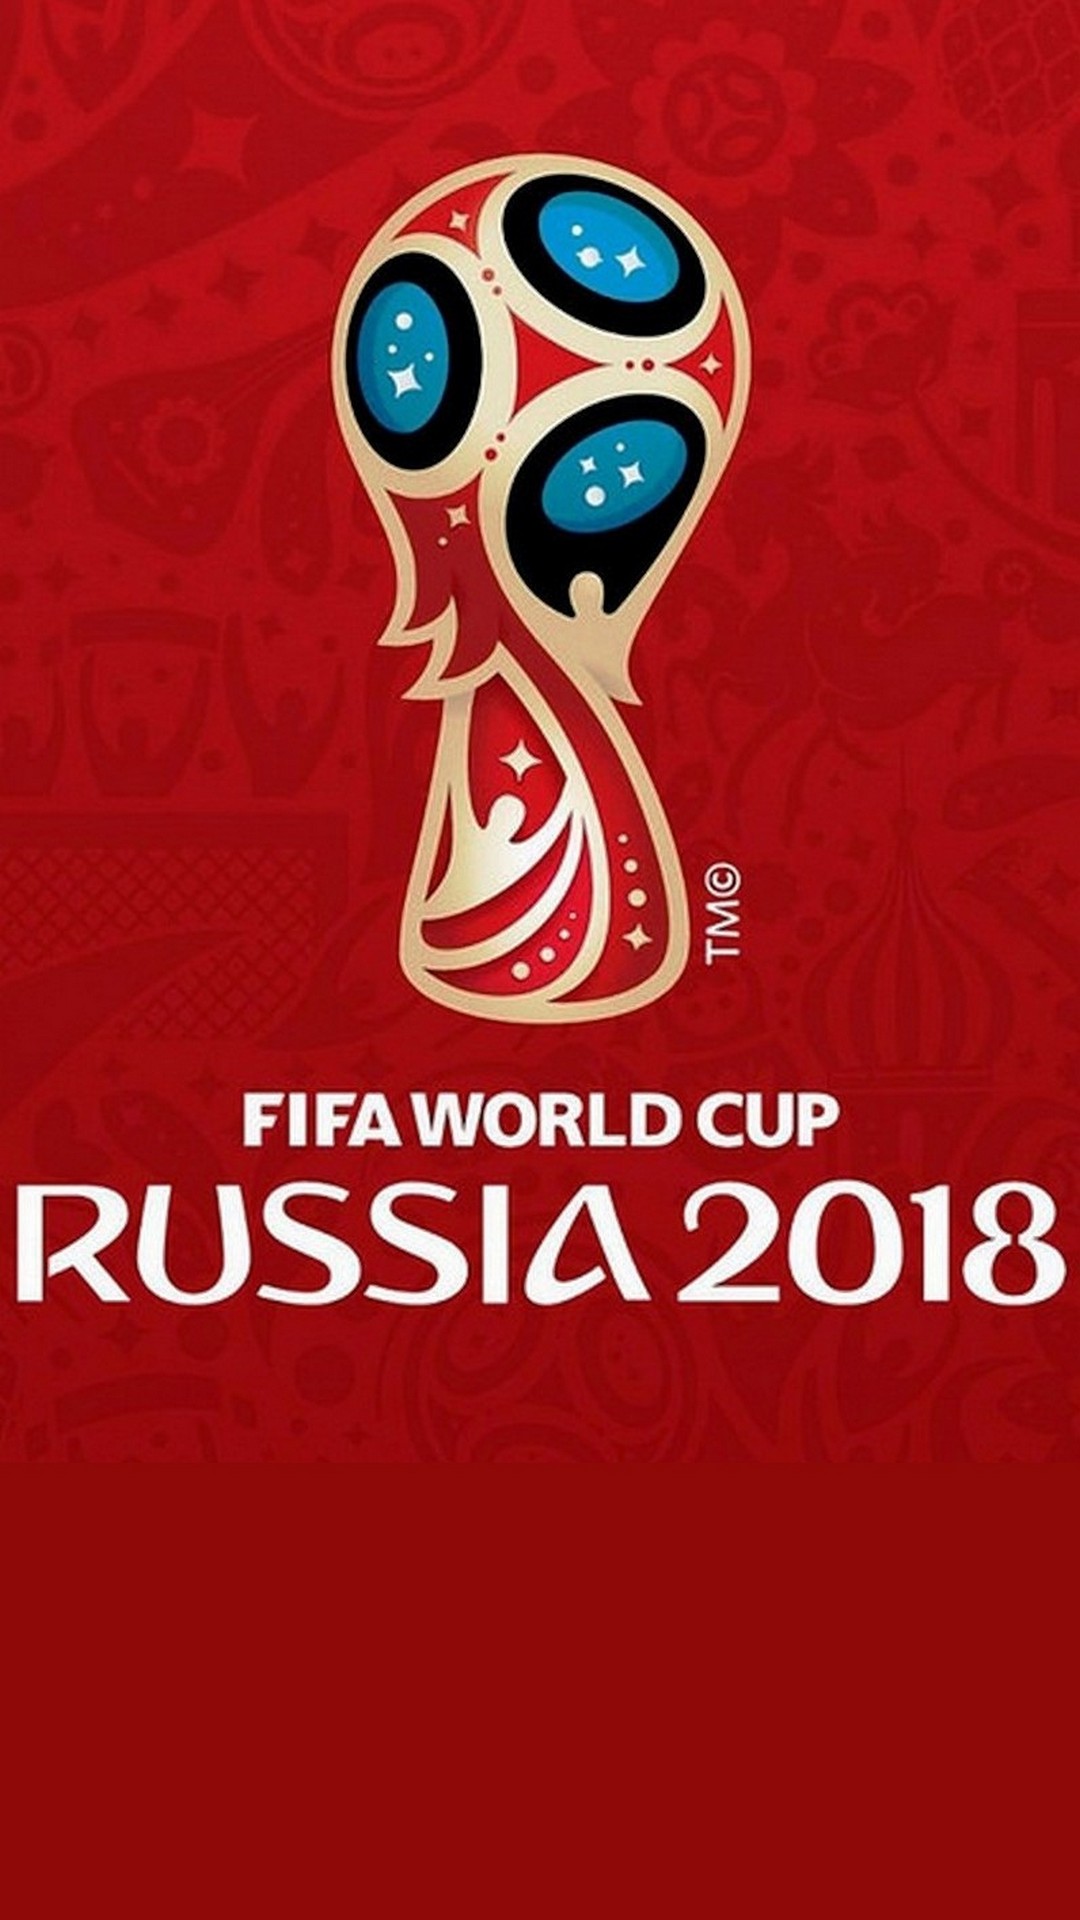 2018 World Cup Wallpaper Android High Resolution 1080X1920